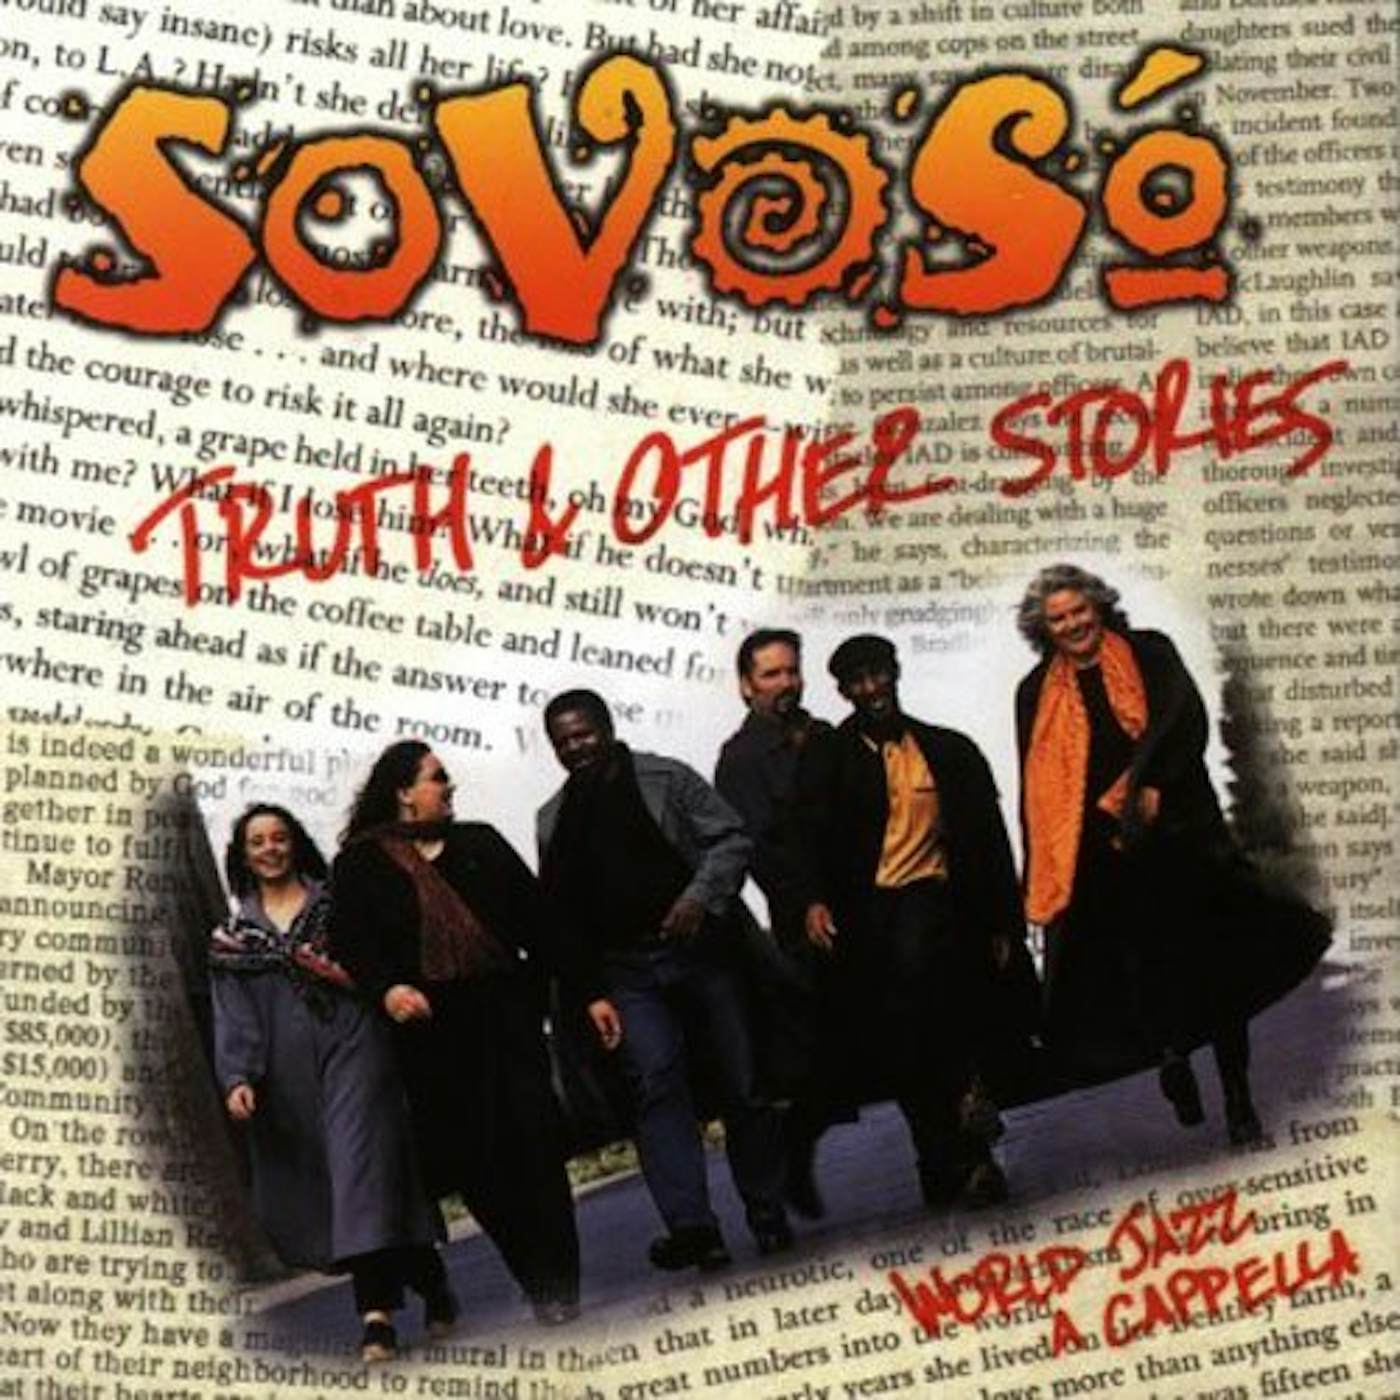 SoVoSo TRUTH & OTHER STORIES CD